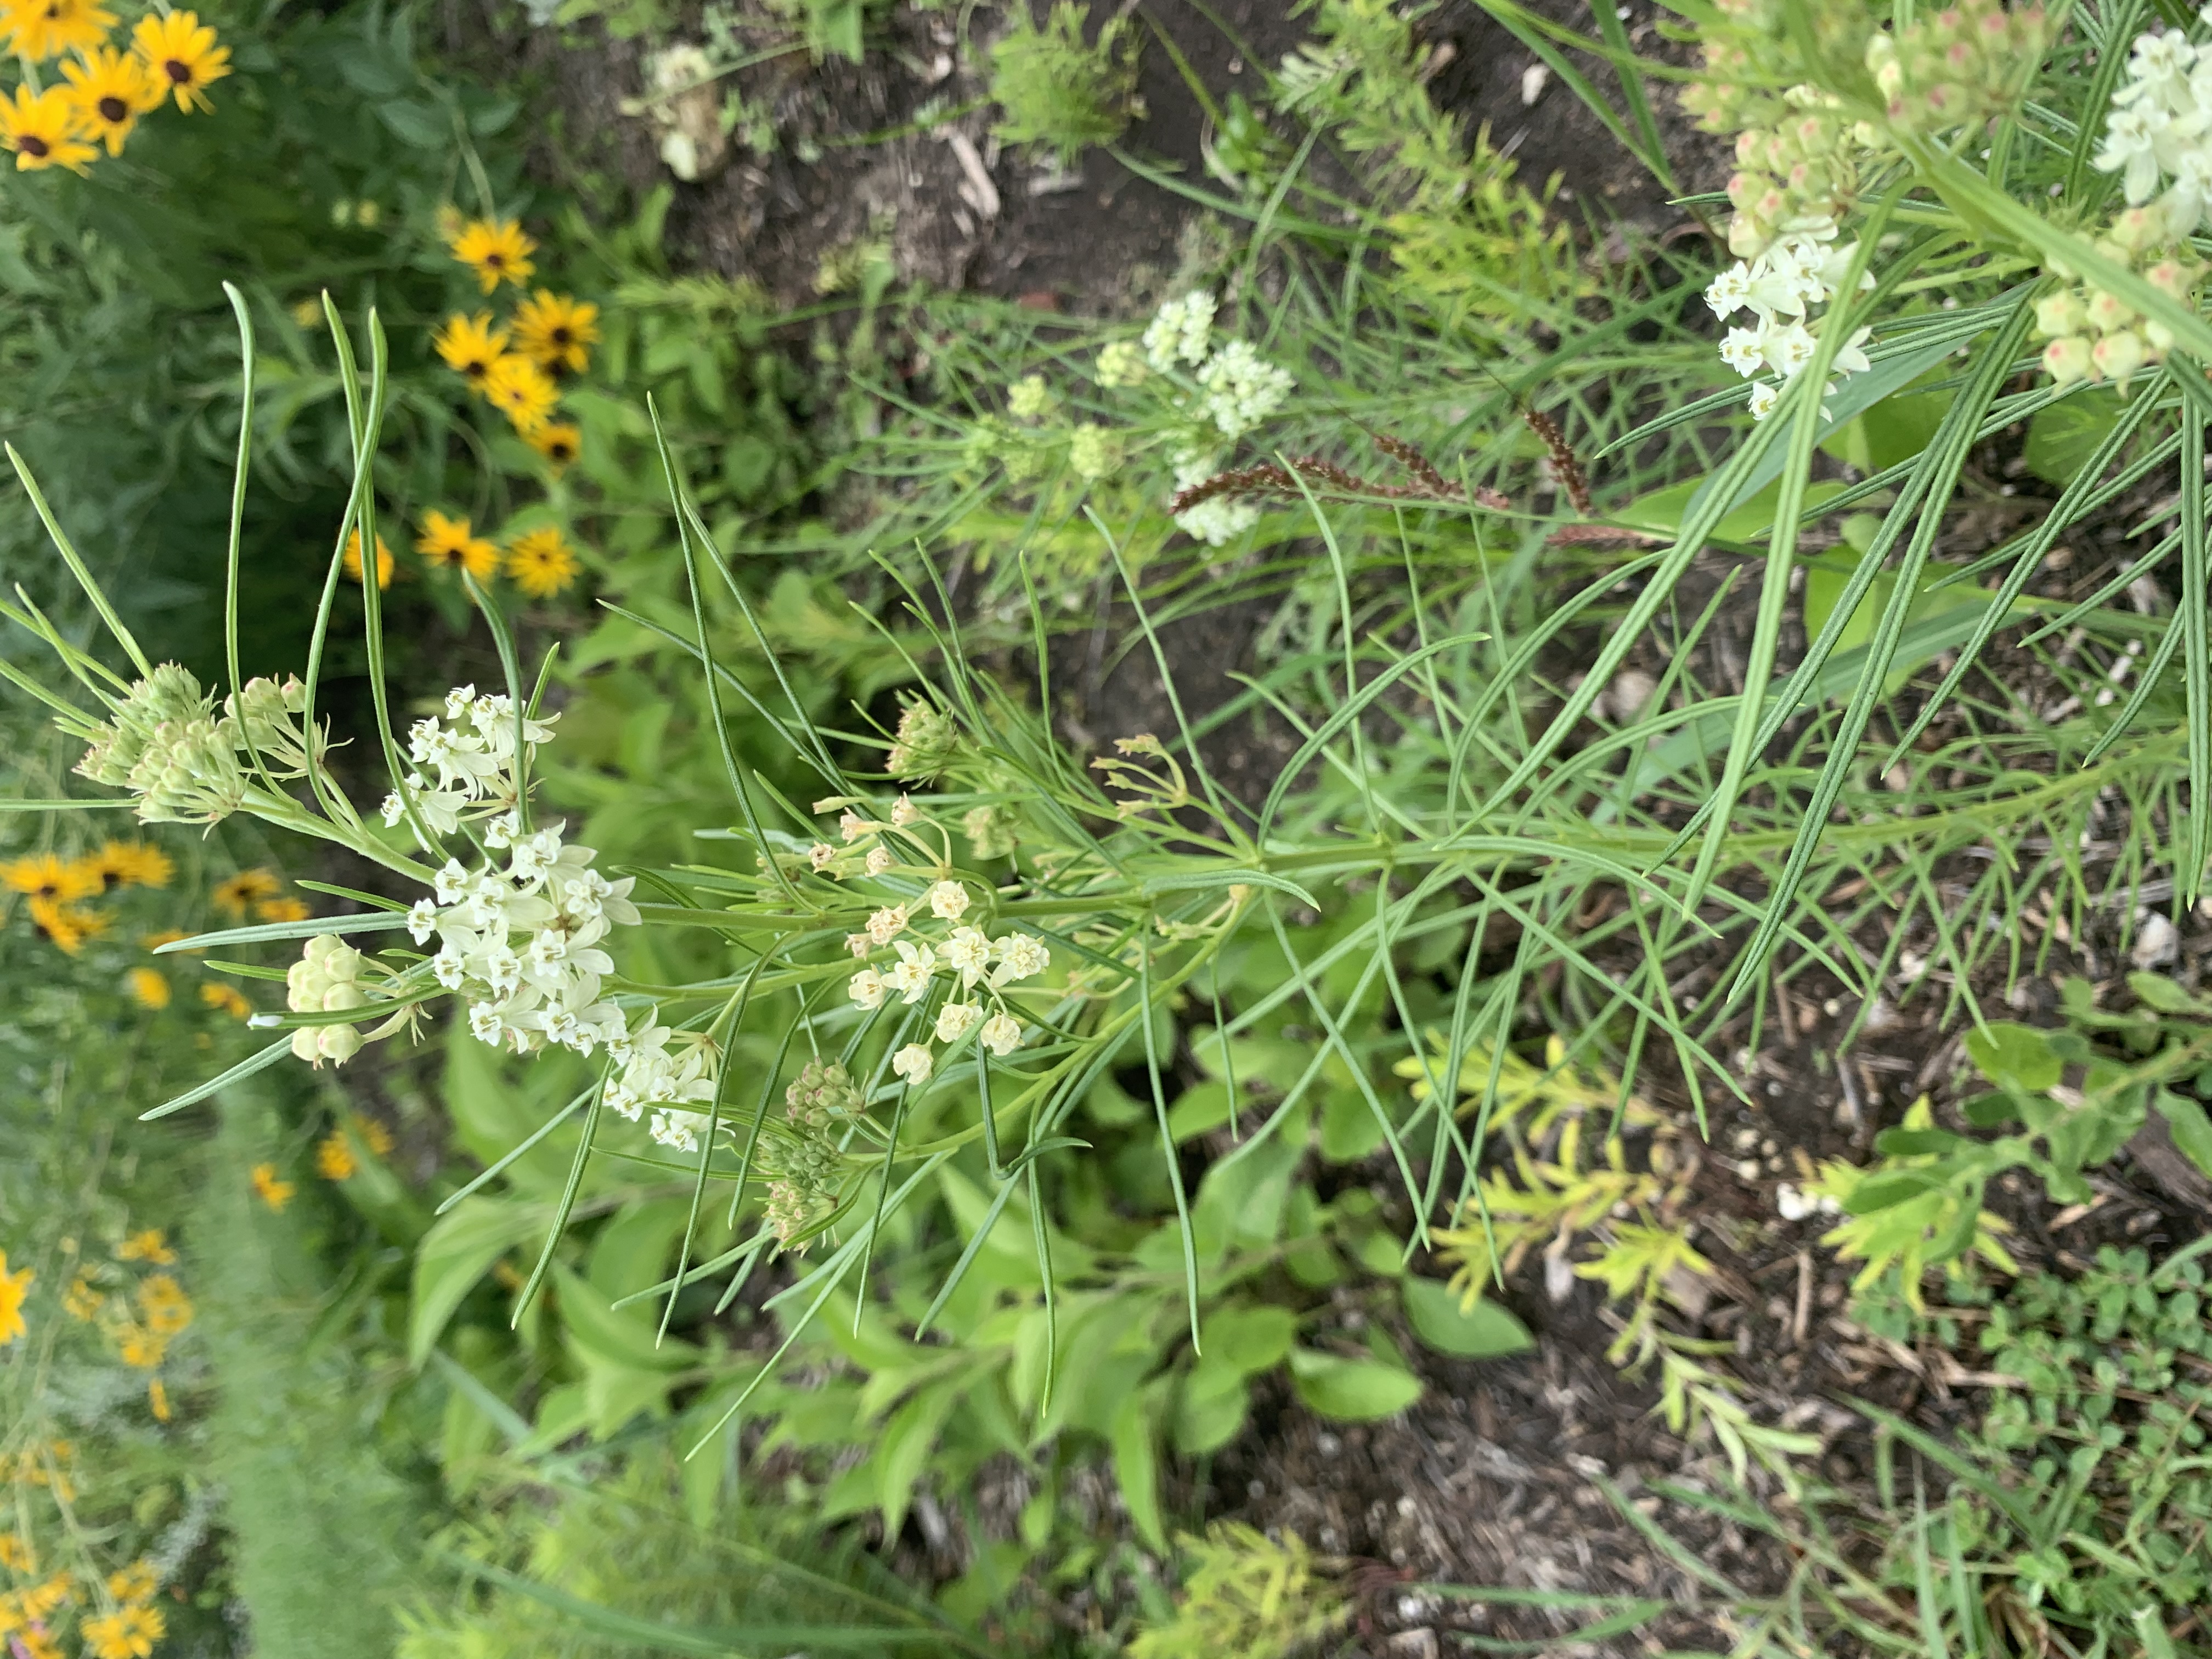 A green plant with delicate white flowers at the top and thin green needle-like leaves